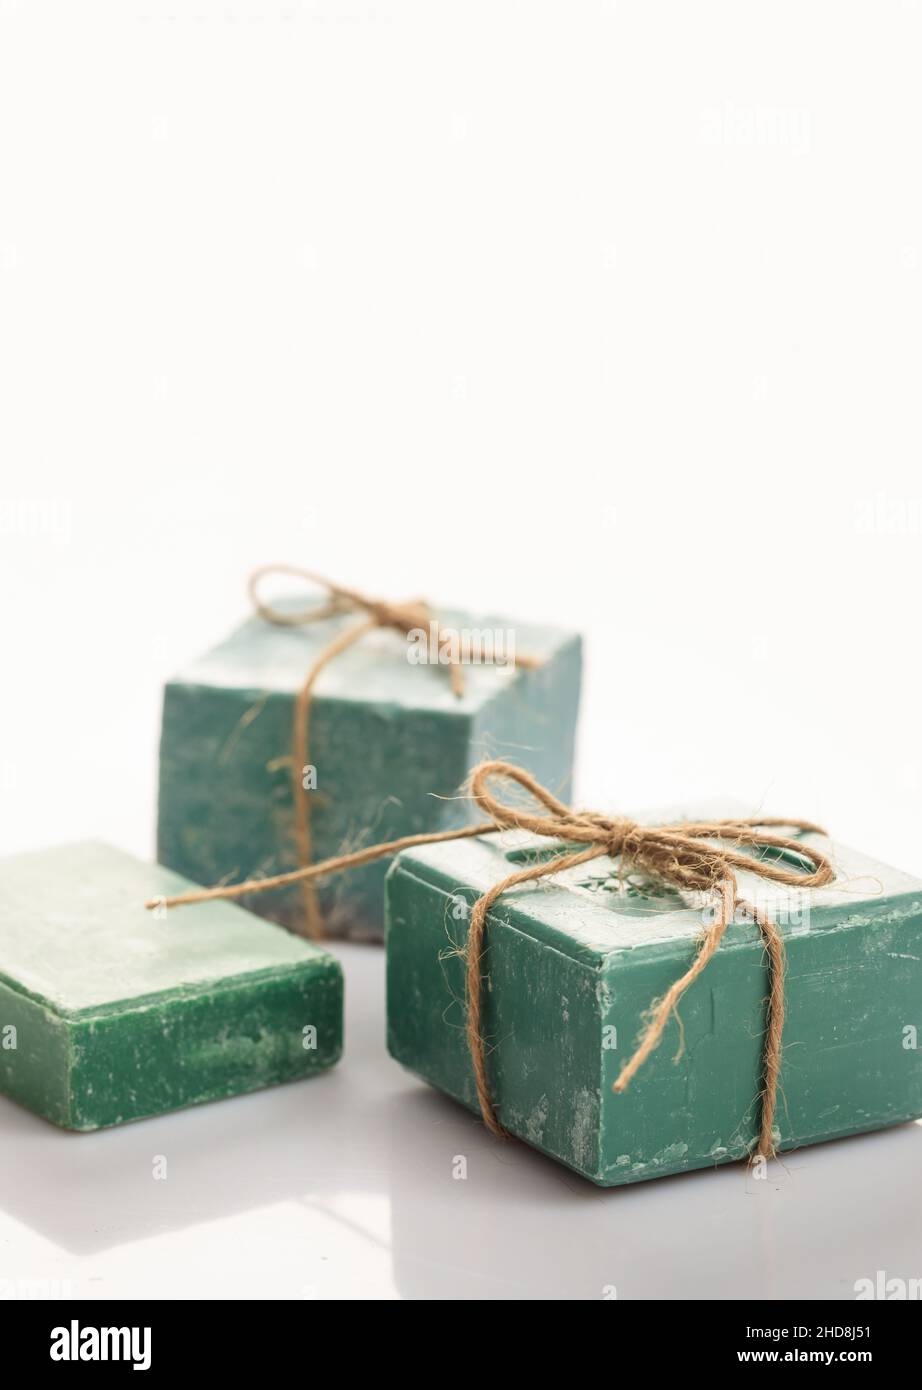 Handmade soap bars tied with rope on white background. Luxury green bath soap from olive aromatherapy, spa, refresh, healthcare, hygiene, herbal cosme Stock Photo